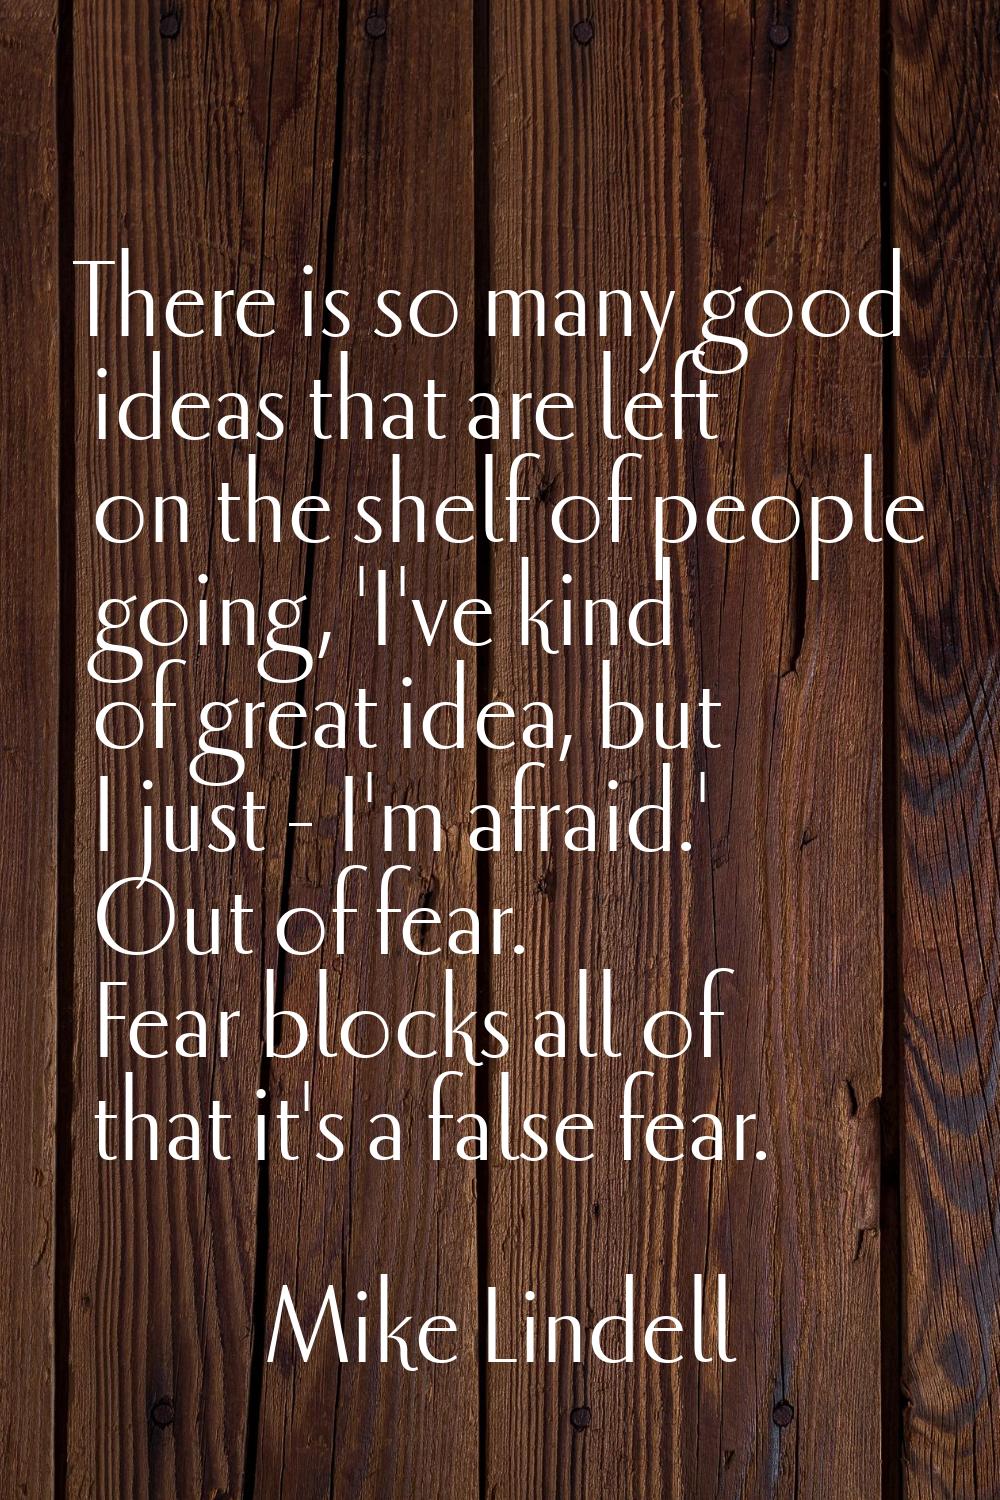 There is so many good ideas that are left on the shelf of people going, 'I've kind of great idea, b